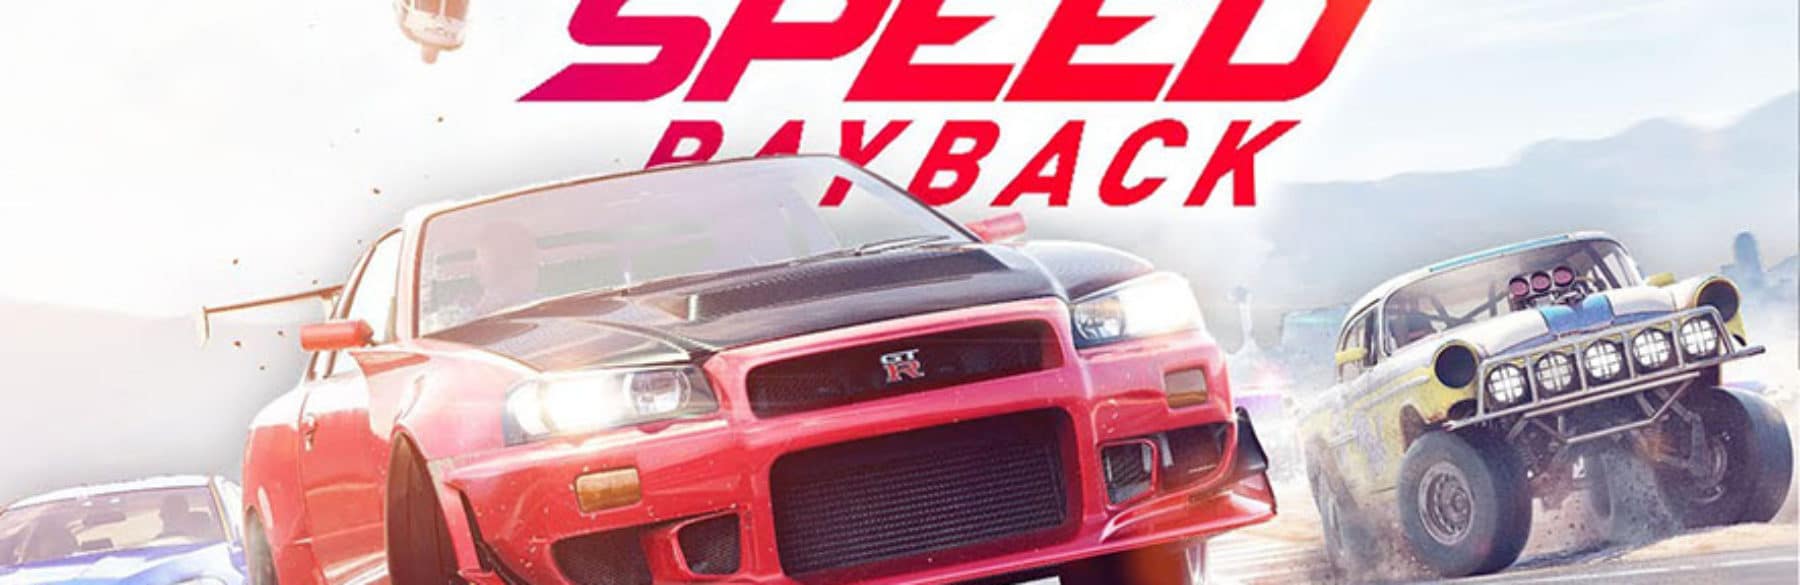 Need For Speed Playback | Trailer